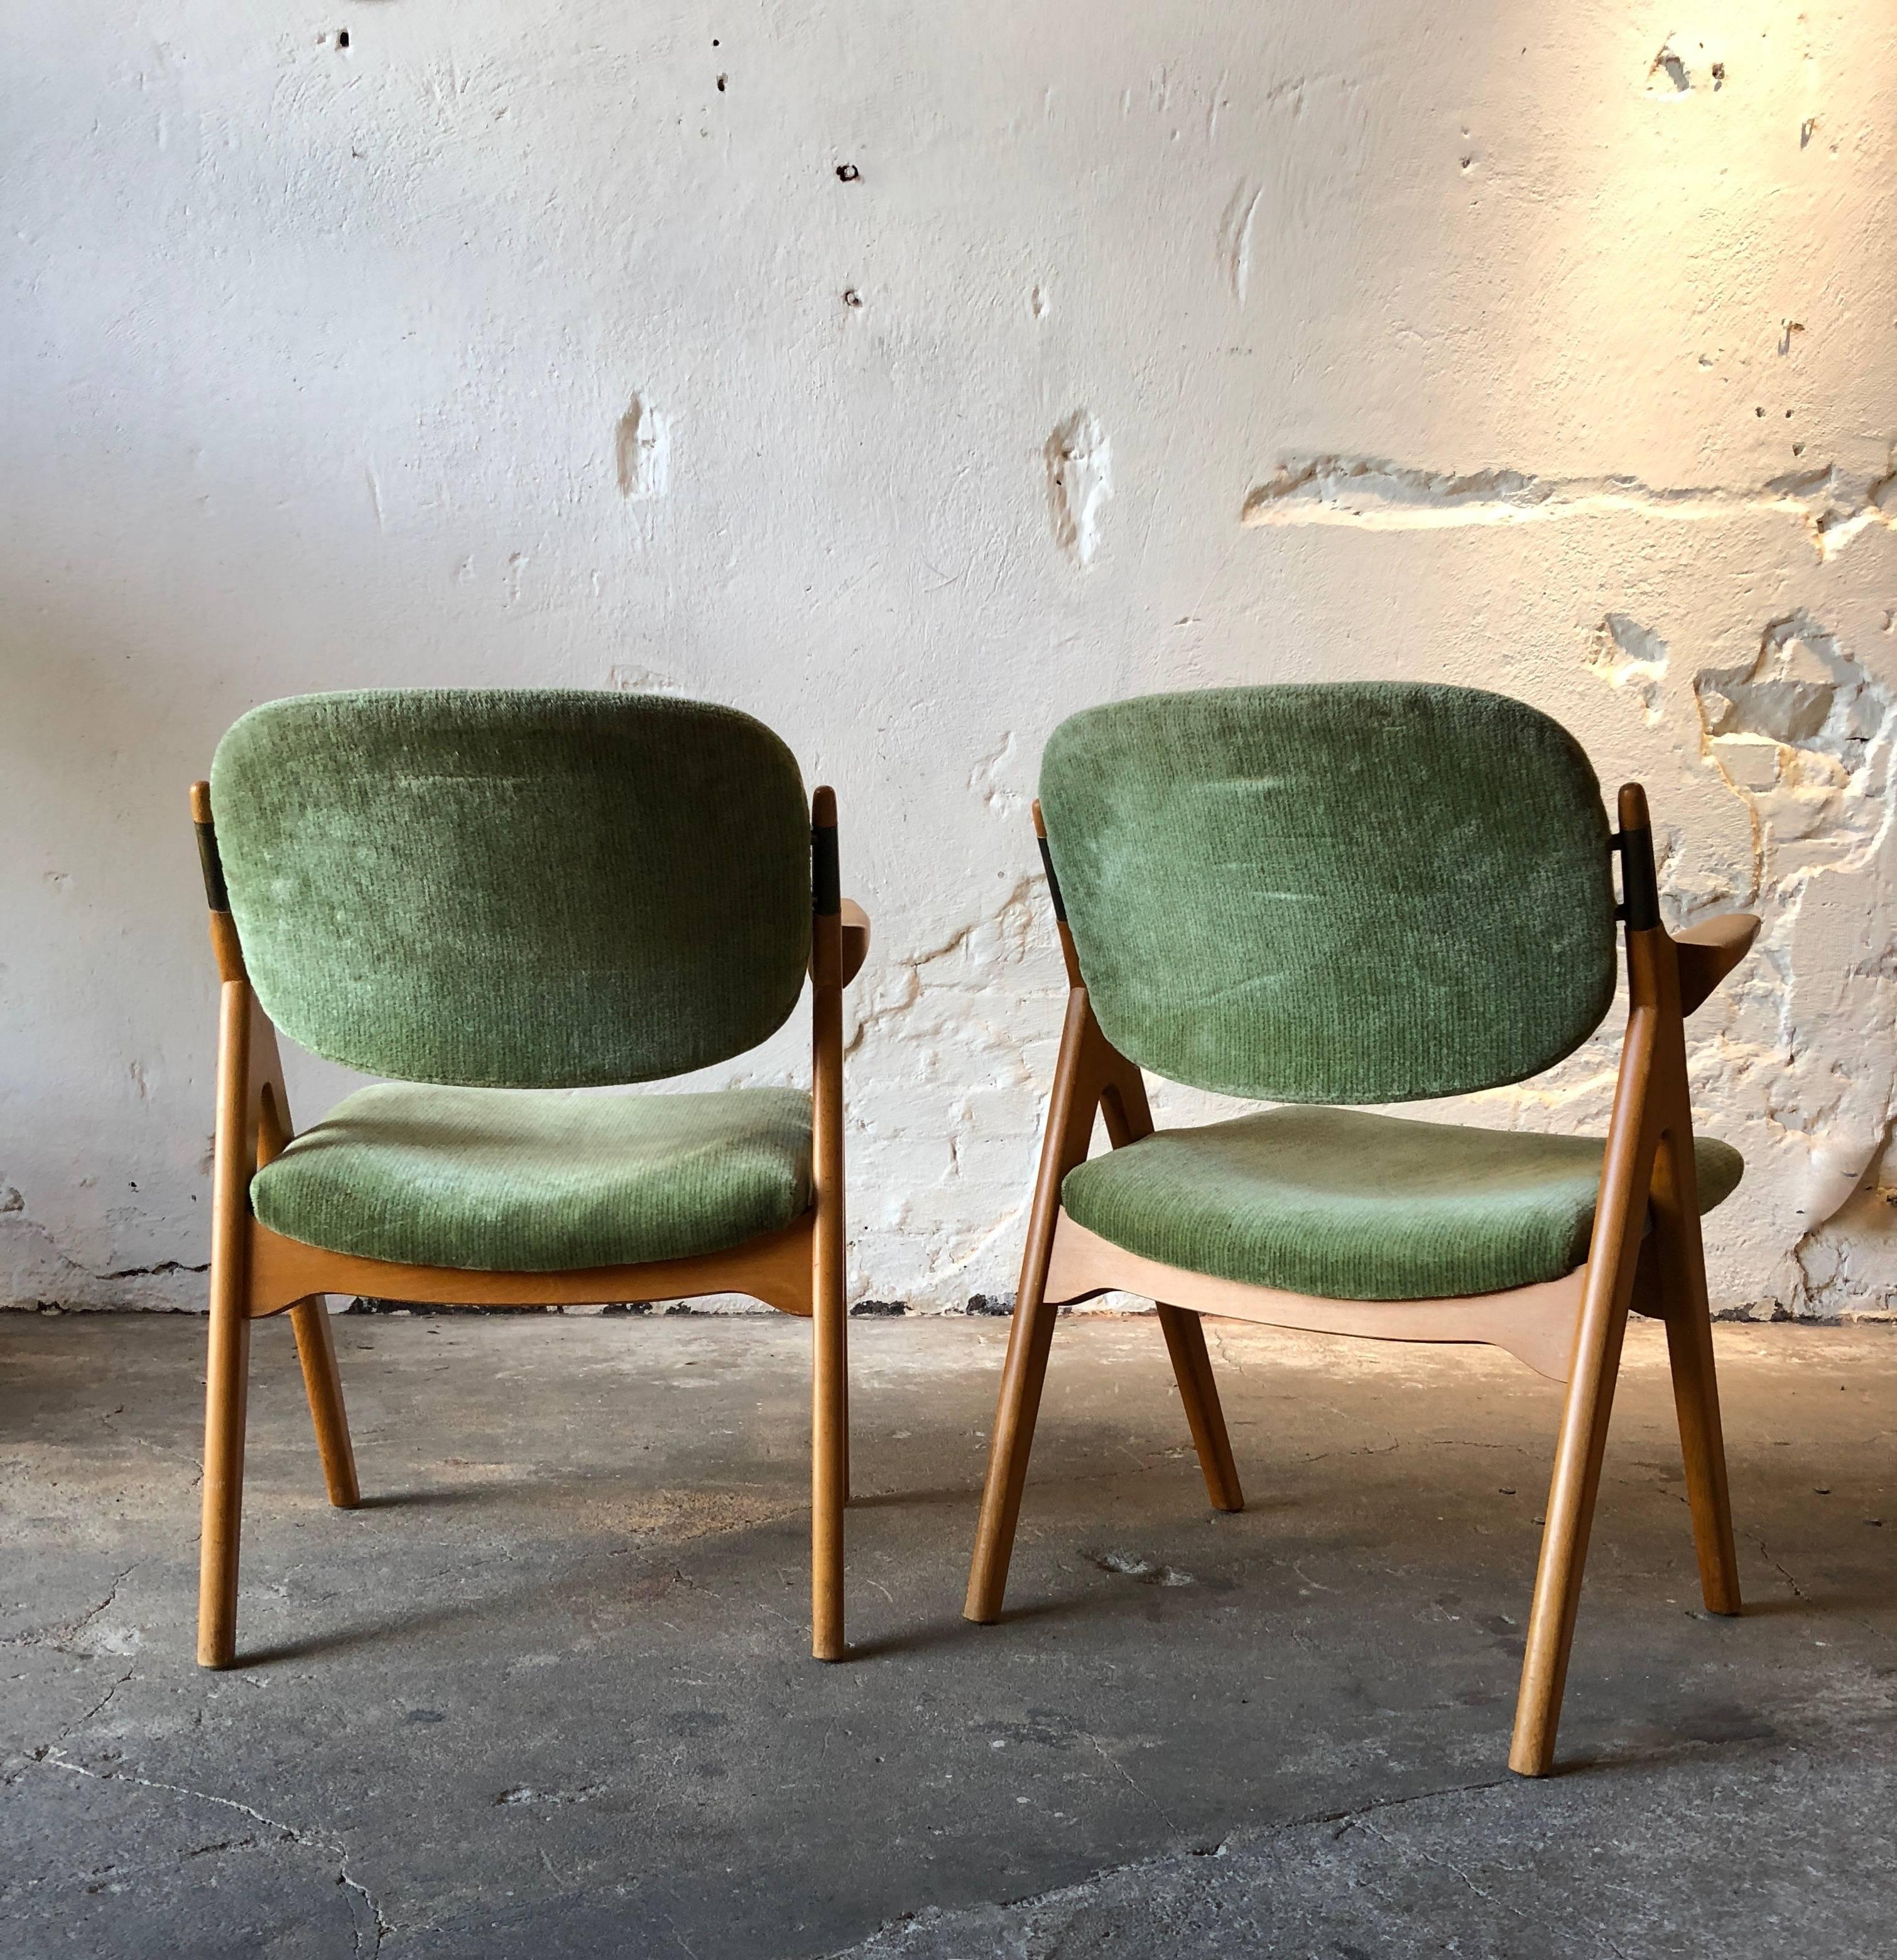 Scandinavian Modern Armchairs in Birch with Original Upholstery 1950s Vintage In Good Condition For Sale In Helsingborg, SE